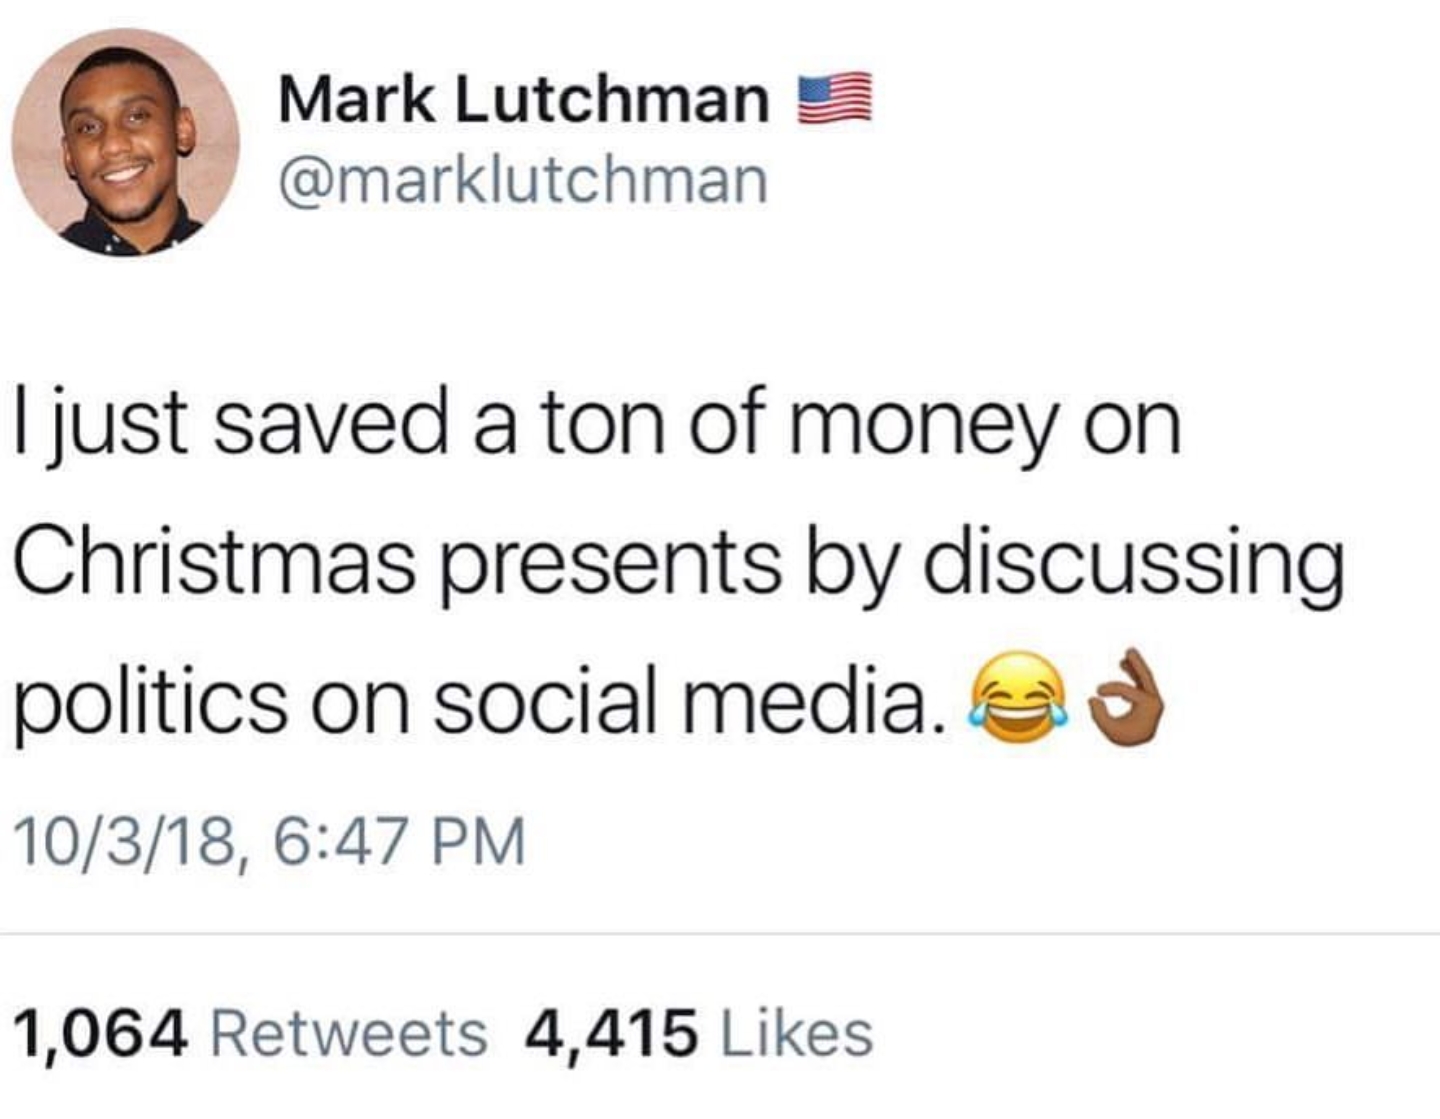 How to cut down on Christmas spending.